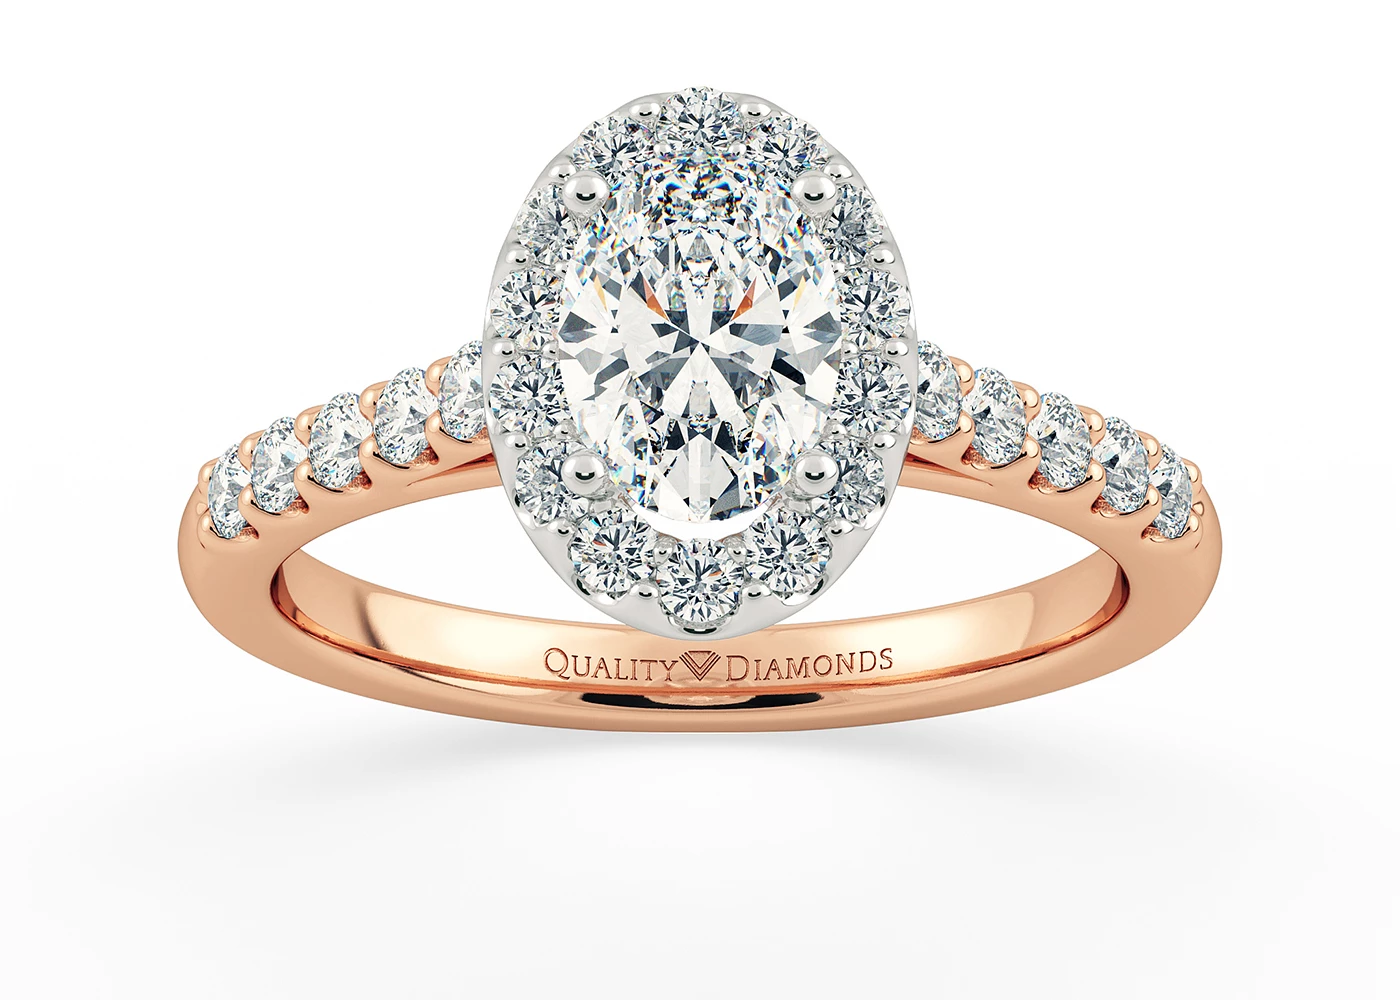 One Carat Lab Grown Oval Halo Diamond Ring in 18K Rose Gold